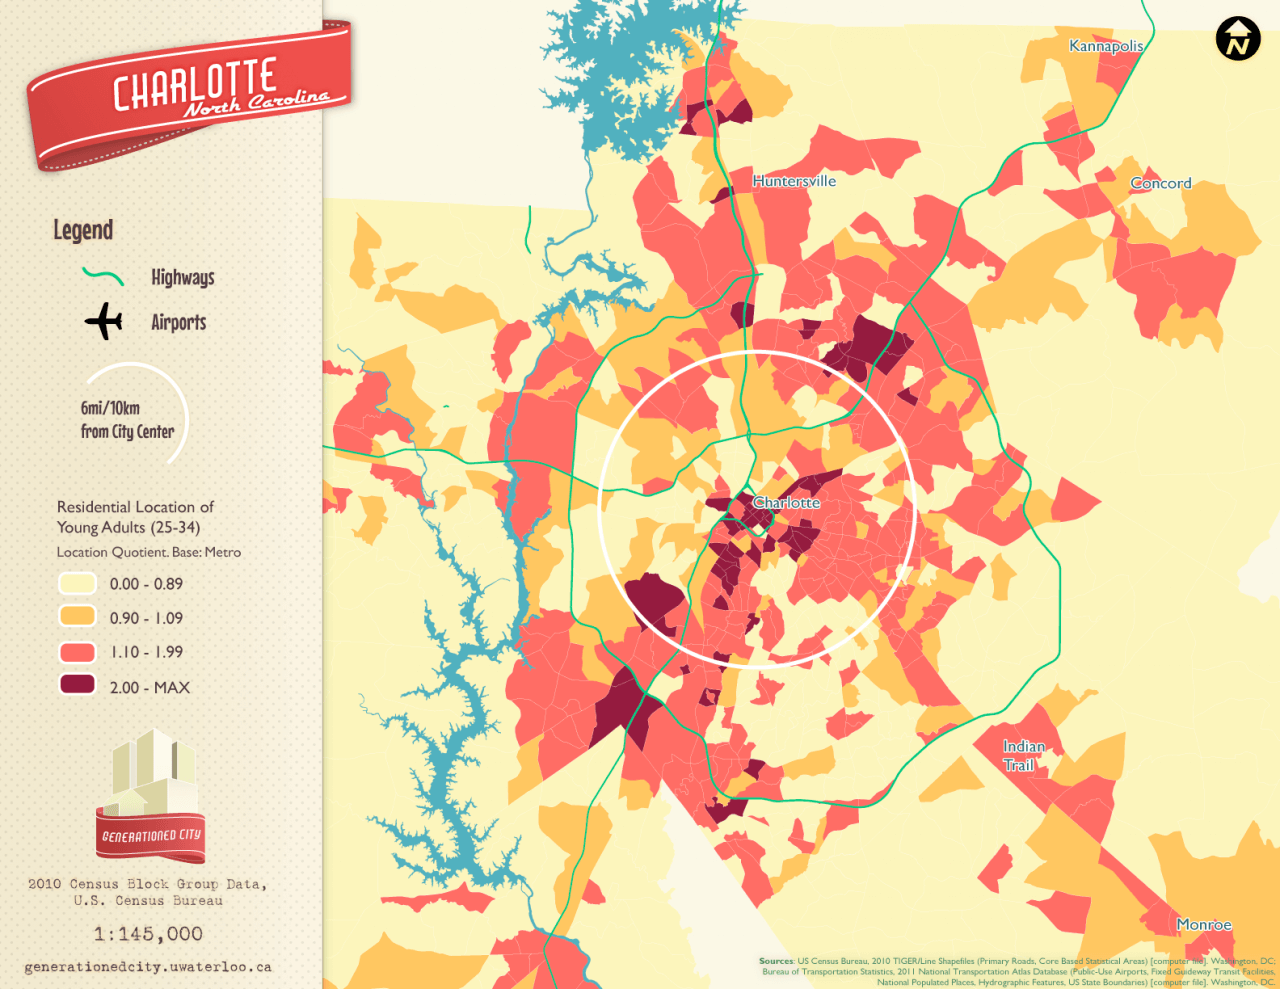 Residential location of young adults in Charlotte.